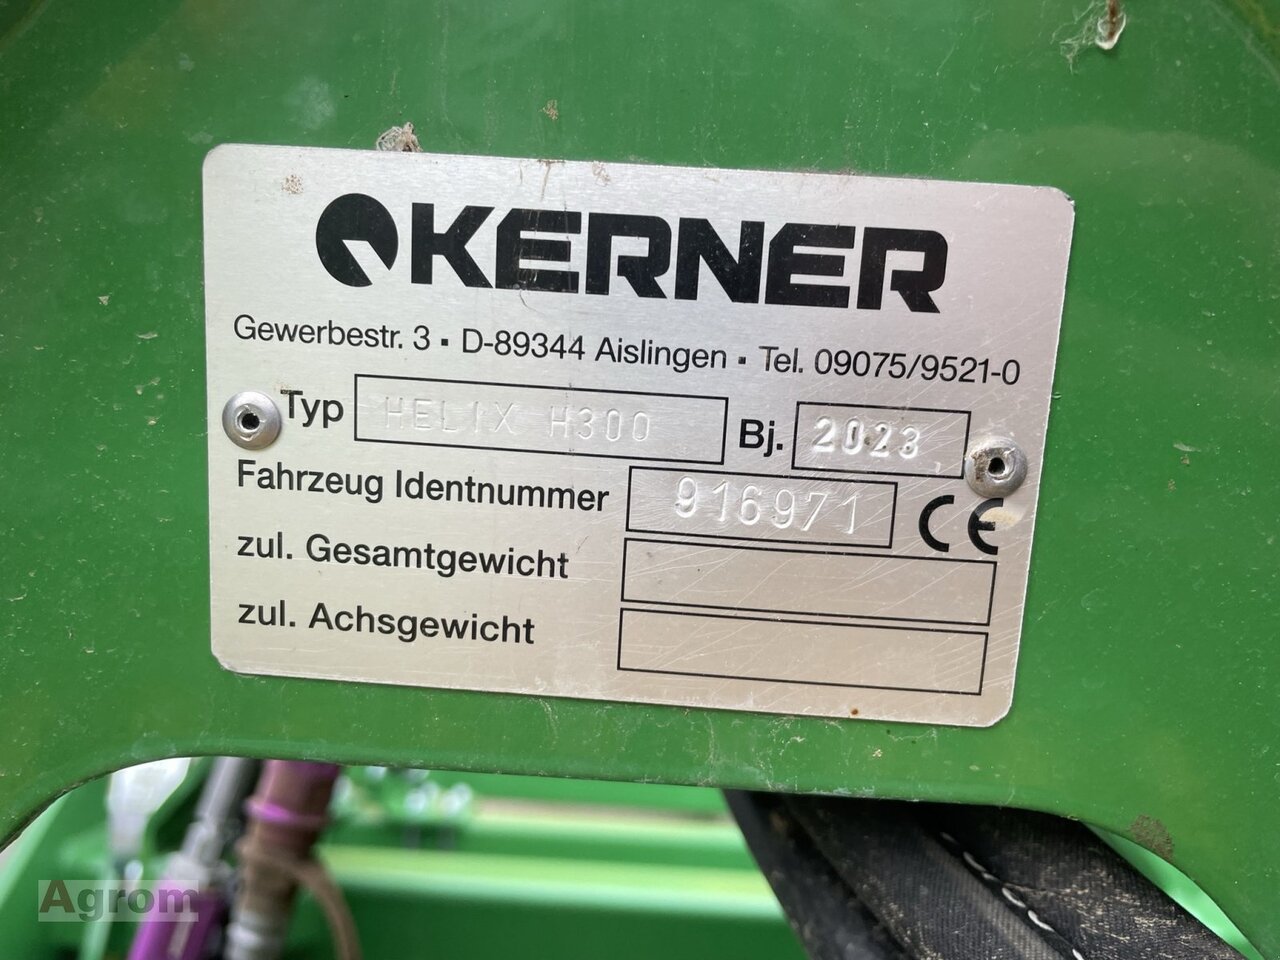 Cover crop neuf Kerner Helix H300: photos 6